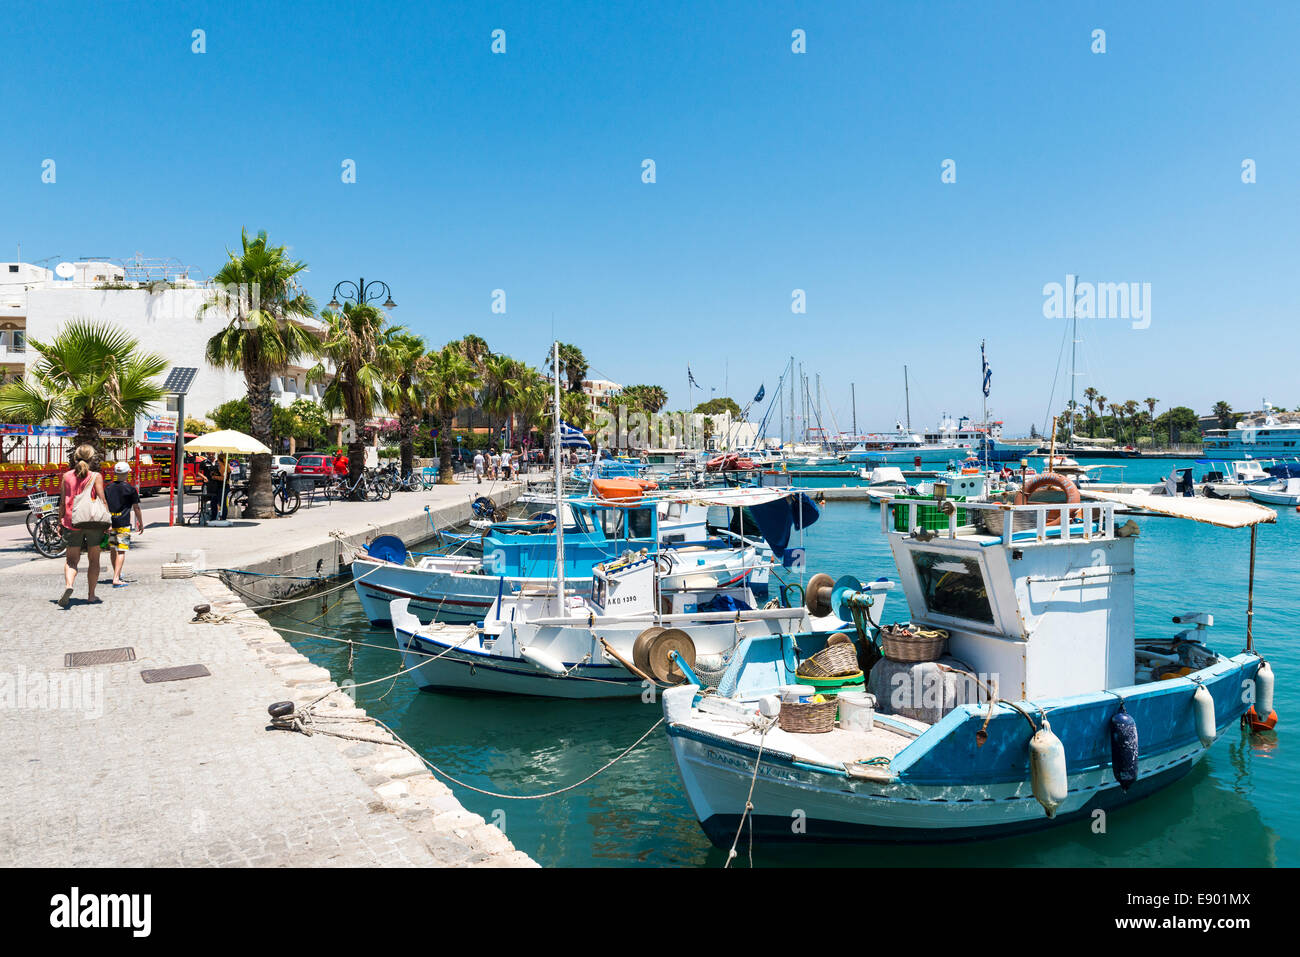 Typical fishing boats in the harbor the town of Kos, Greece Stock Photo